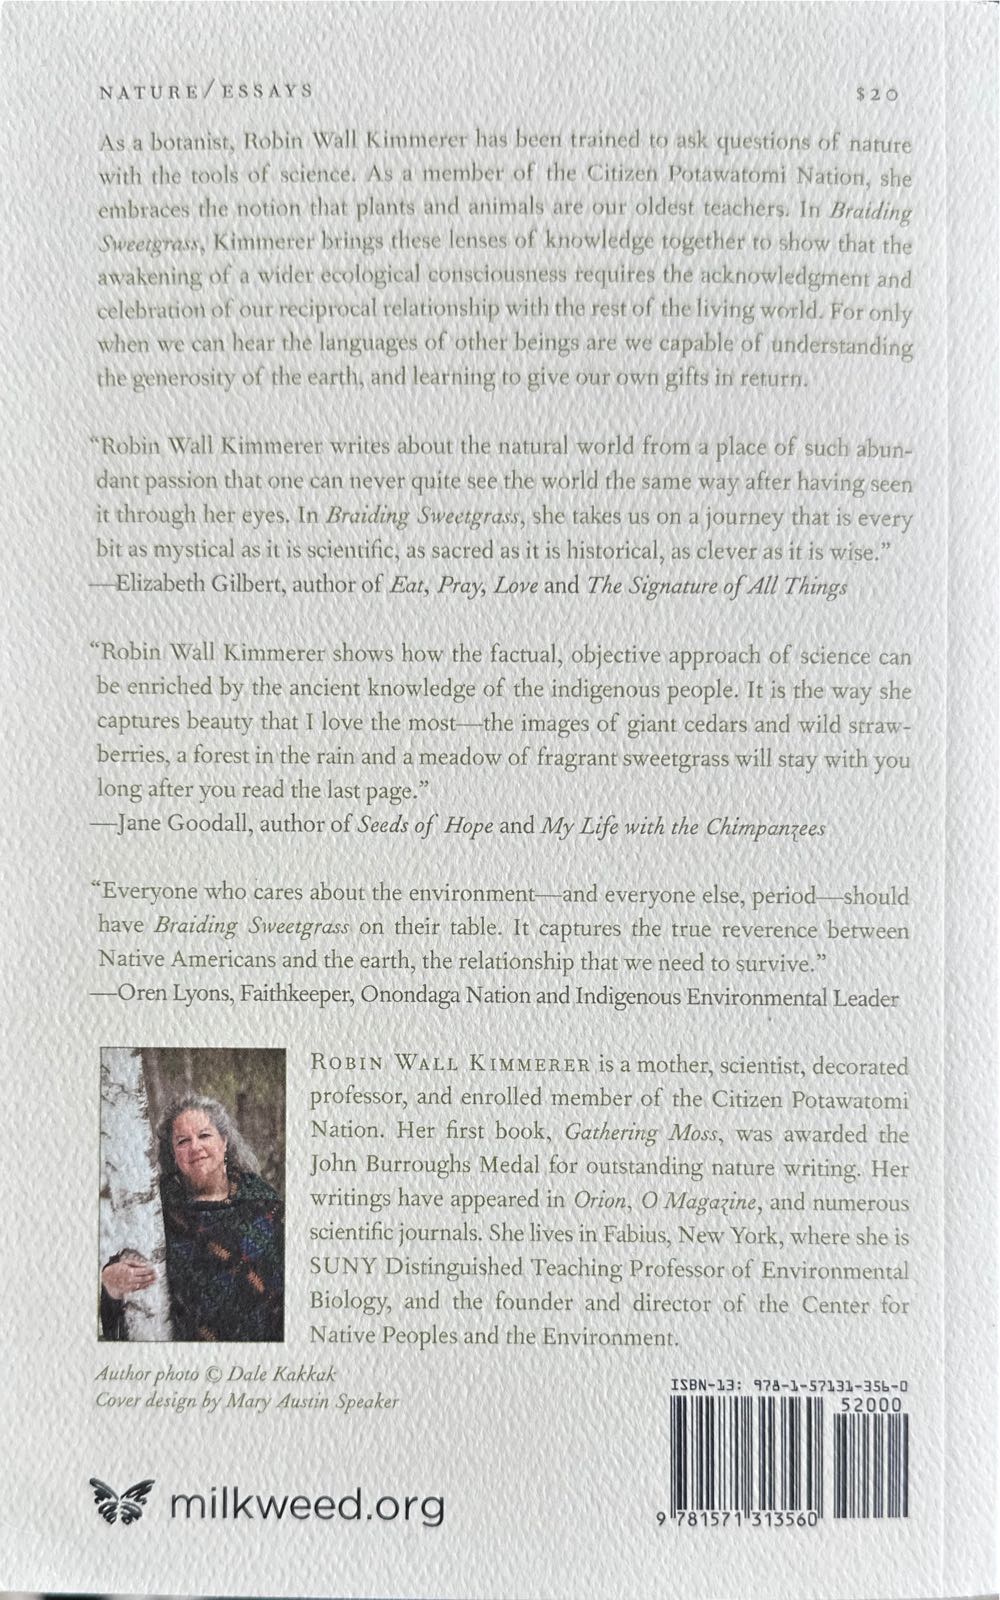 Braiding Sweetgrass: Indigenous Wisdom, Scientific Knowledge, and the Teachings of Plants - Robin Wall Kimmerer (Milkweed Editions - Paperback) book collectible [Barcode 9781571313560] - Main Image 2